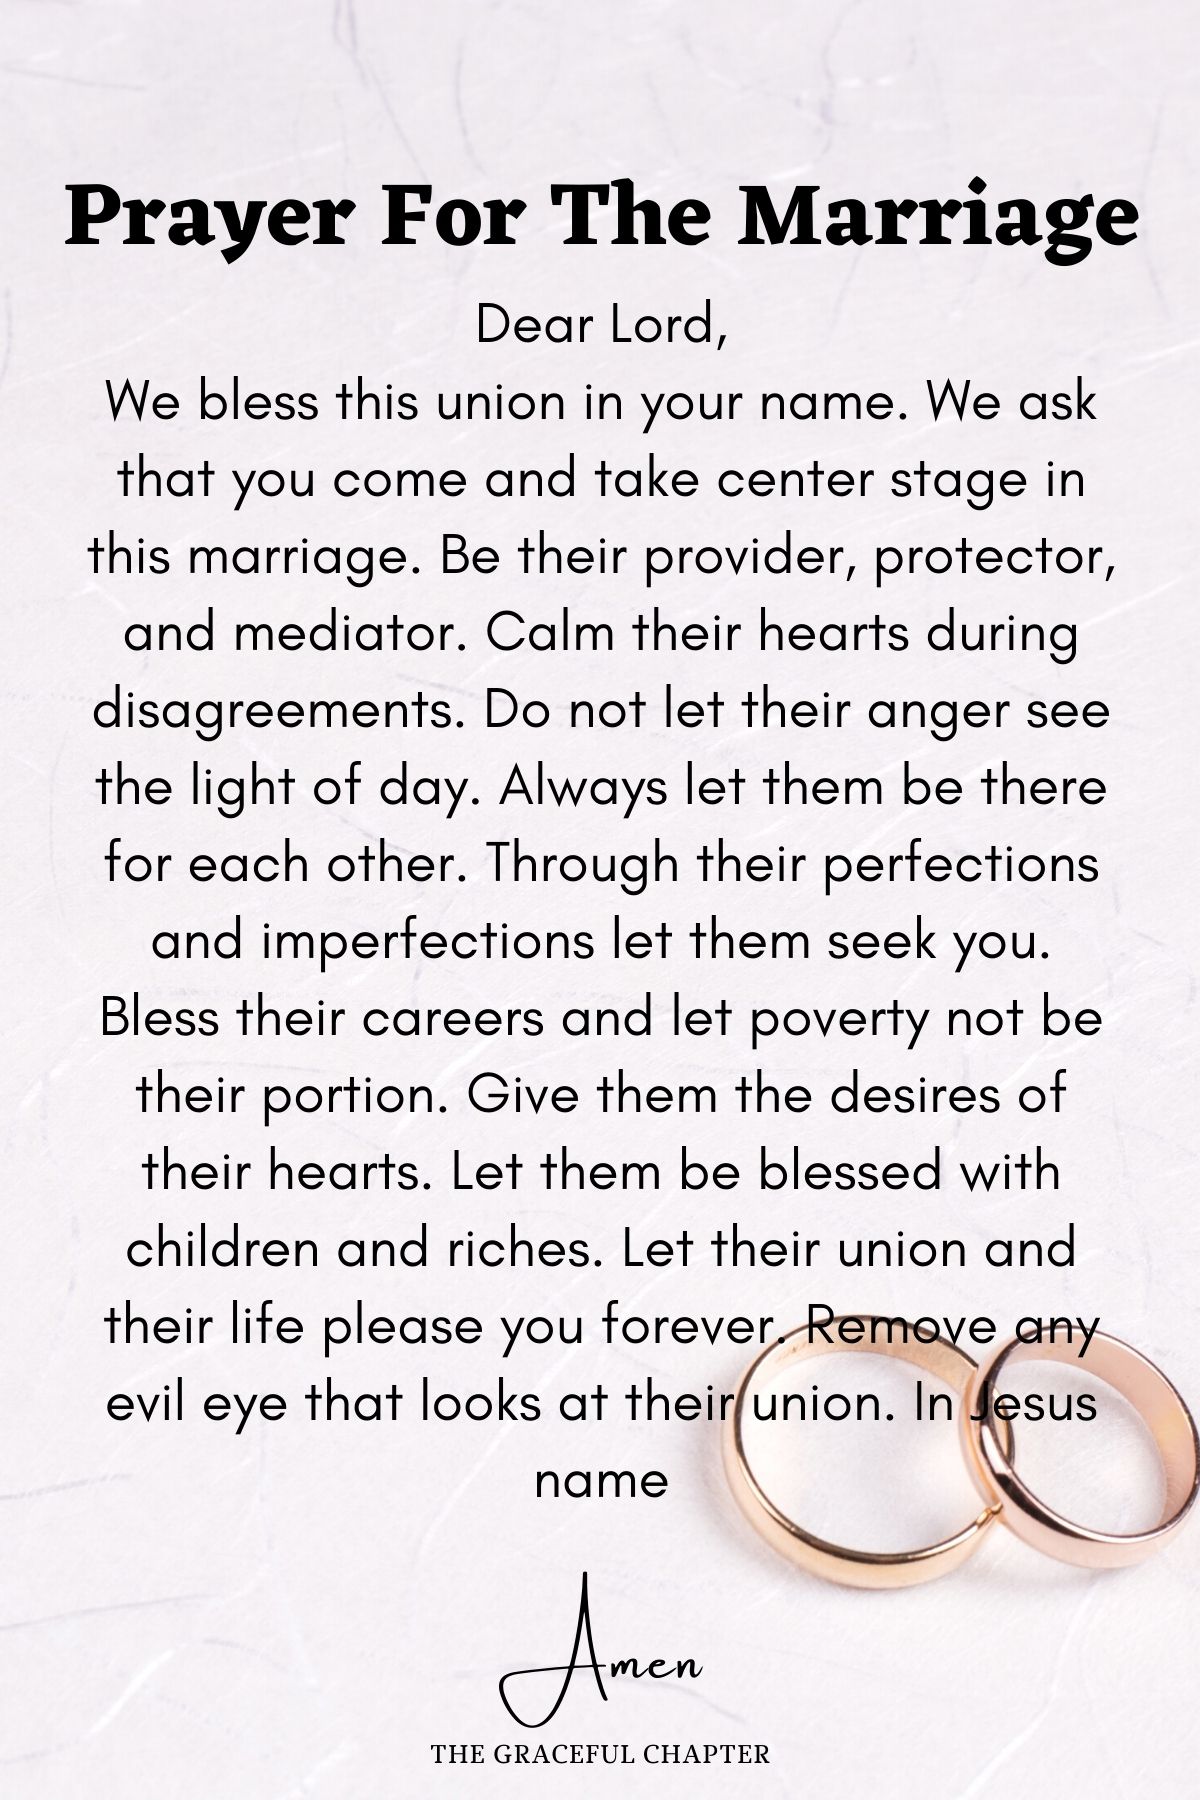 Prayer for the marriage